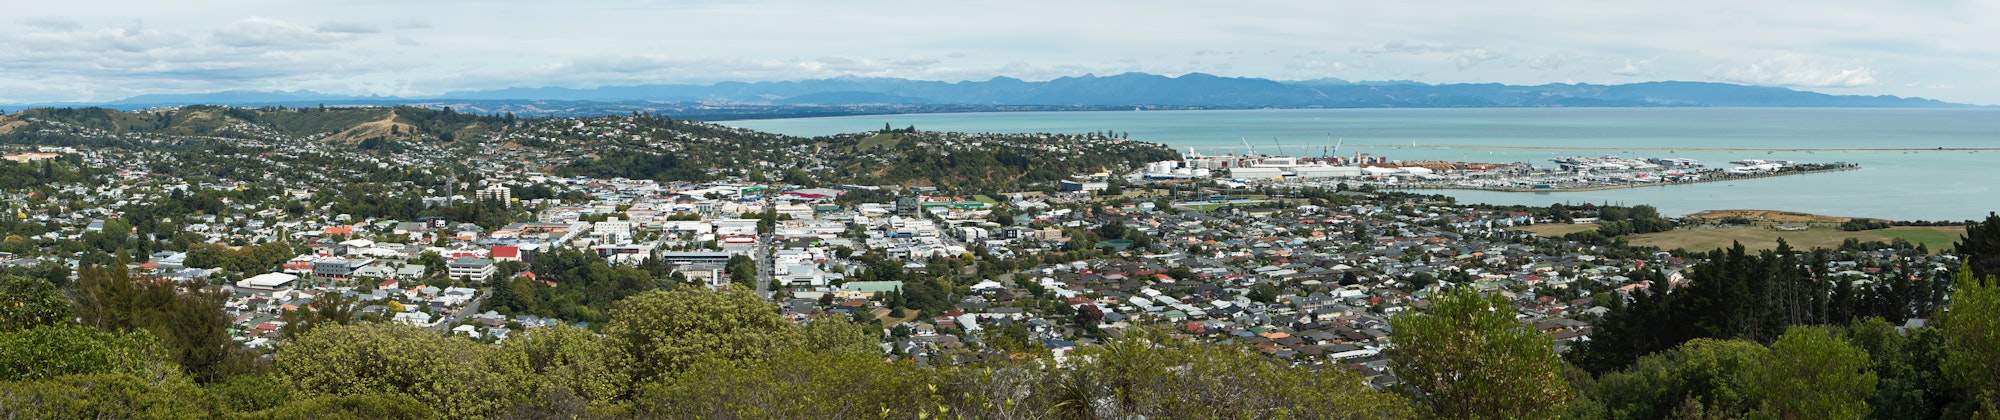 Nelson | The Property Group NZ